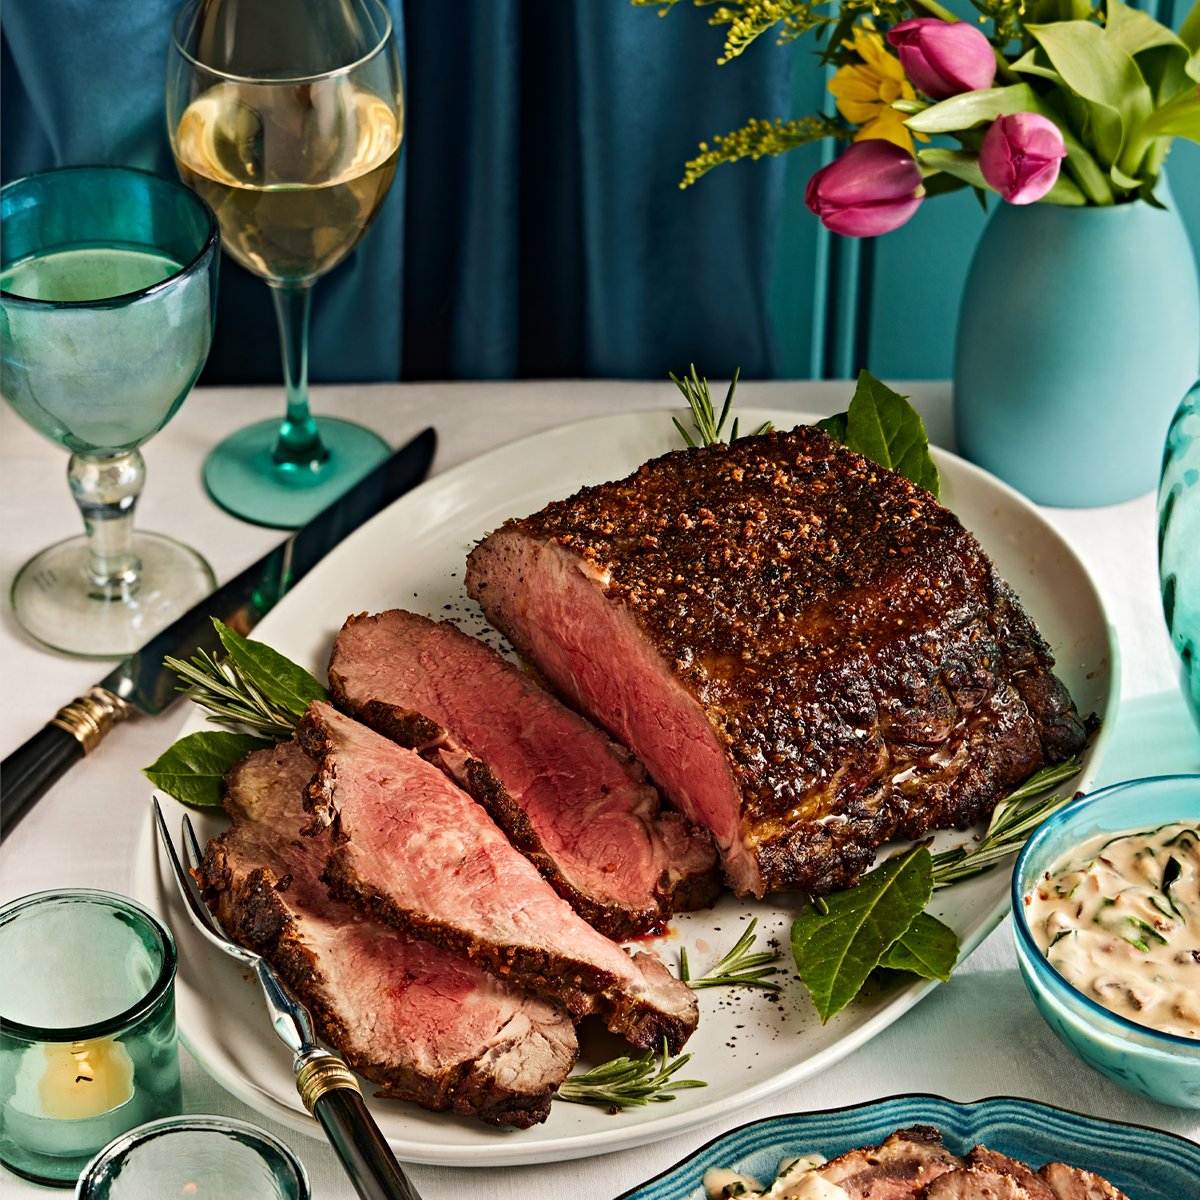 ‘Meat’ the star of your Easter feast! This Roast Striploin with Creamed Mushrooms & Spinach recipe will dazzle your taste buds and steal the show at your table. And right now, just in time for Easter, this top seller is 30% off! Try the recipe here: longos.com/recipes/roast-…